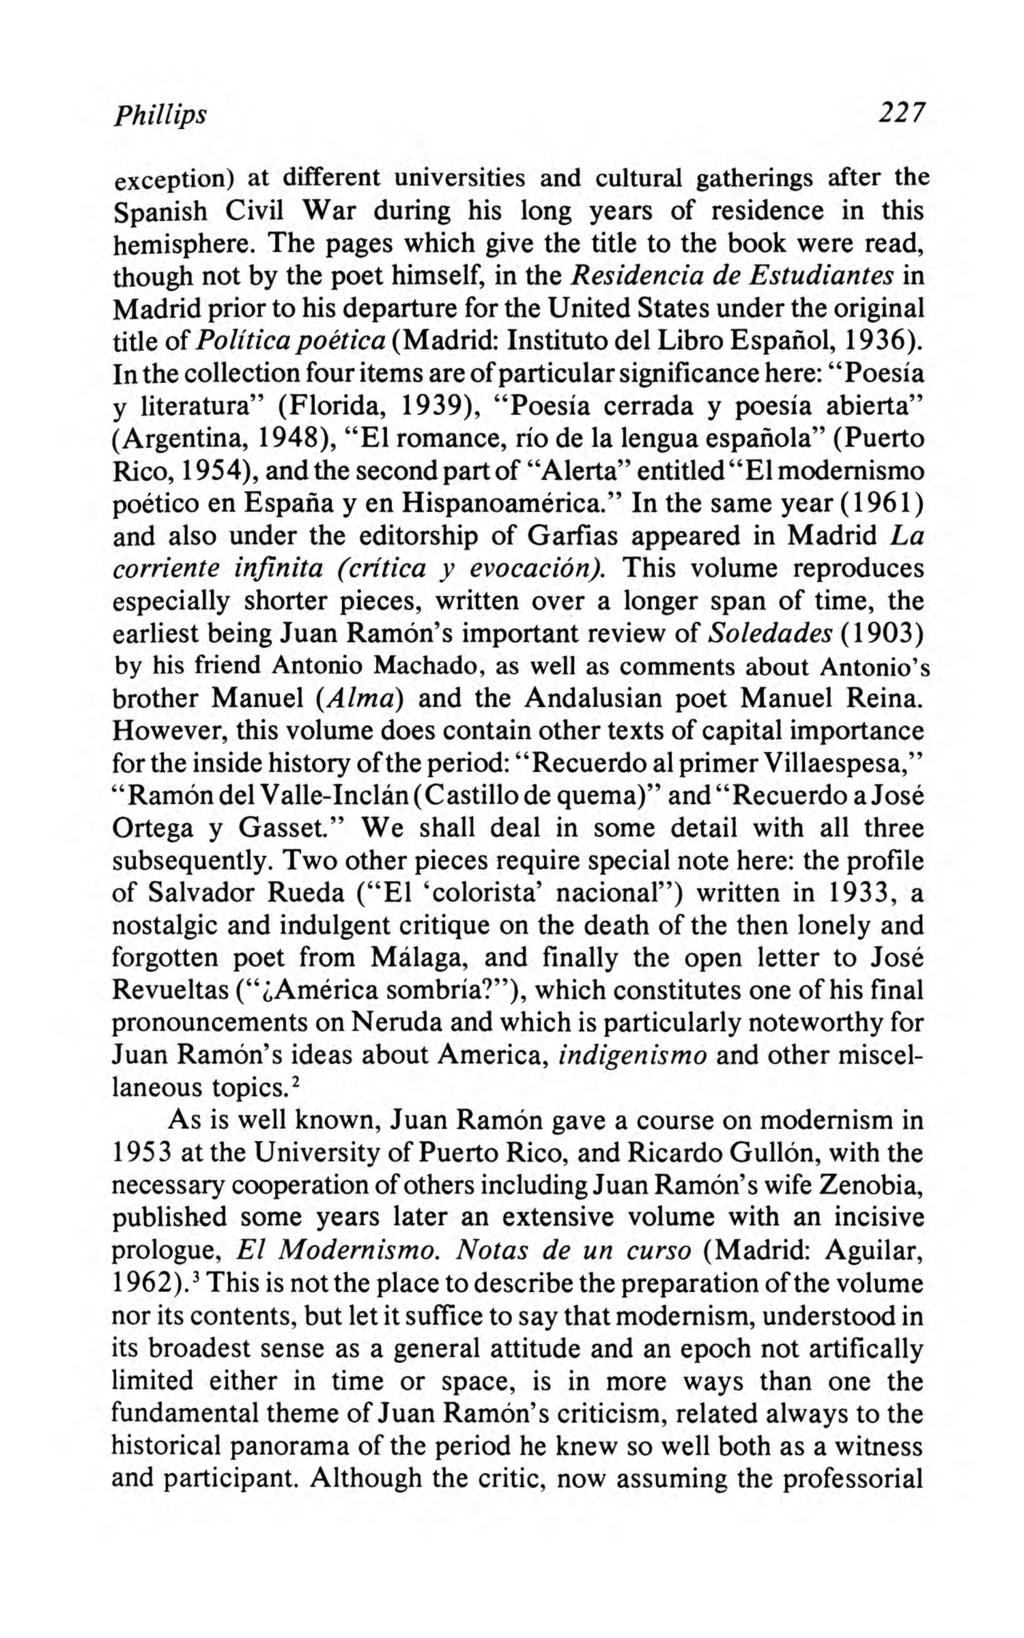 Phillips: The Literary Criticism and Memoirs of Juan Ramón Jiménez Phillips 227 exception) at different universities and cultural gatherings after the Spanish Civil War during his long years of